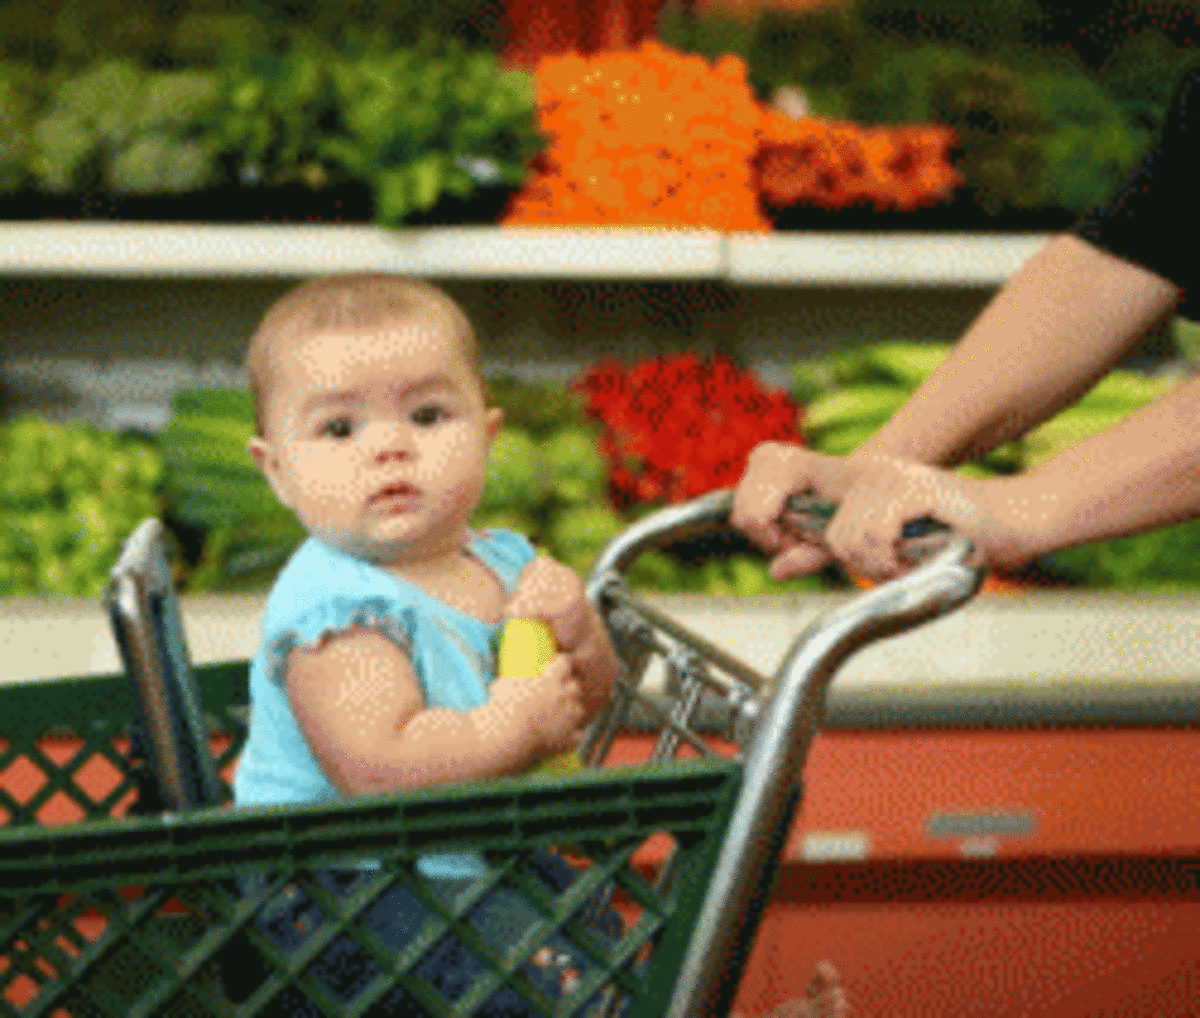 baby-in-grocery-cart3